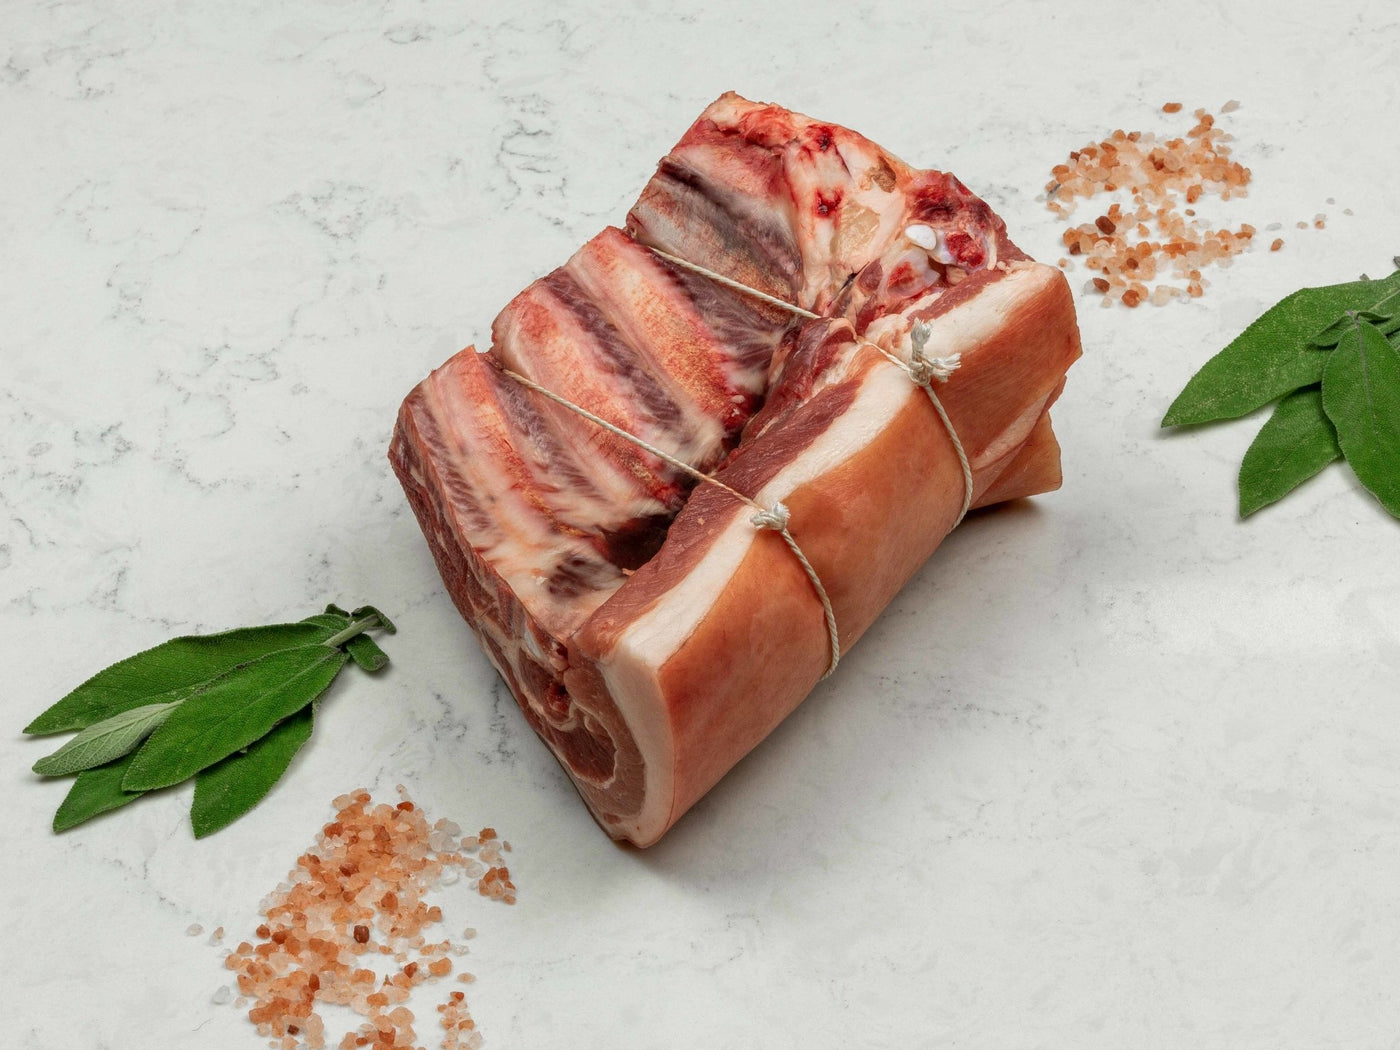 7 Day Dry-Aged, Free Range Pork - Thick End of Belly - Pork - Thomas Joseph Butchery - Ethical Dry-Aged Meat The Best Steak UK Thomas Joseph Butchery